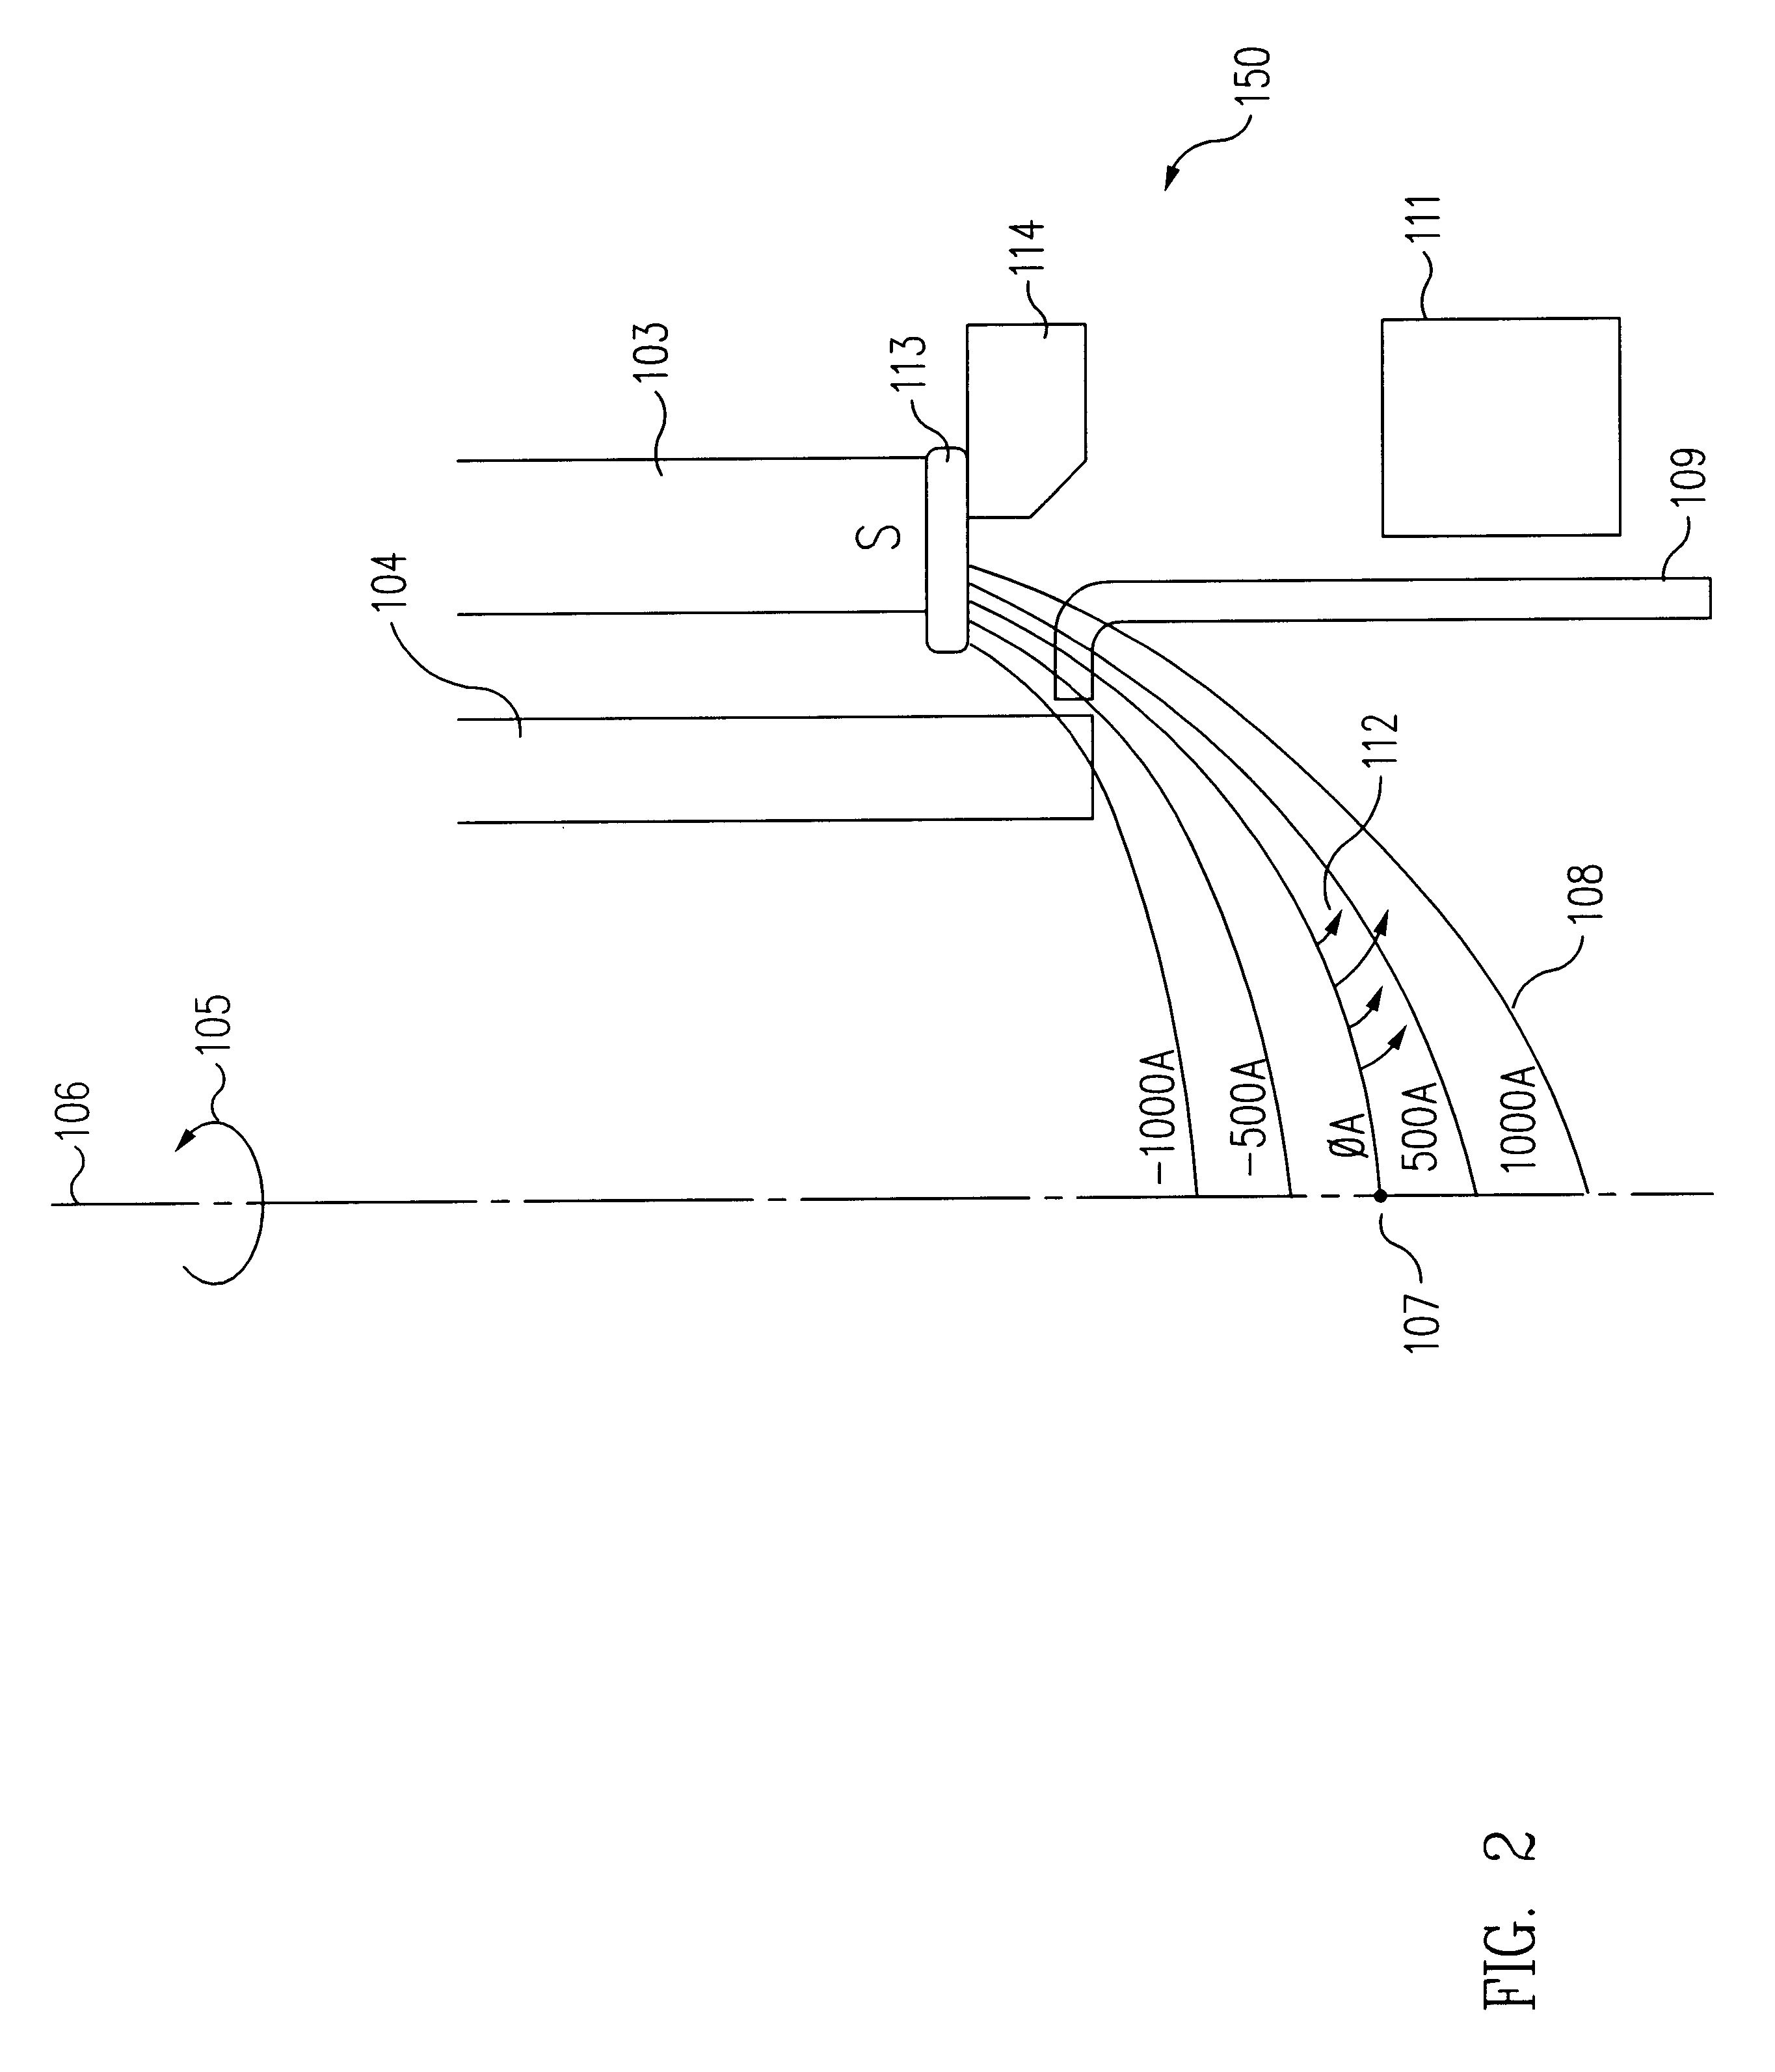 Apparatus and method for controlling plasma uniformity across a substrate